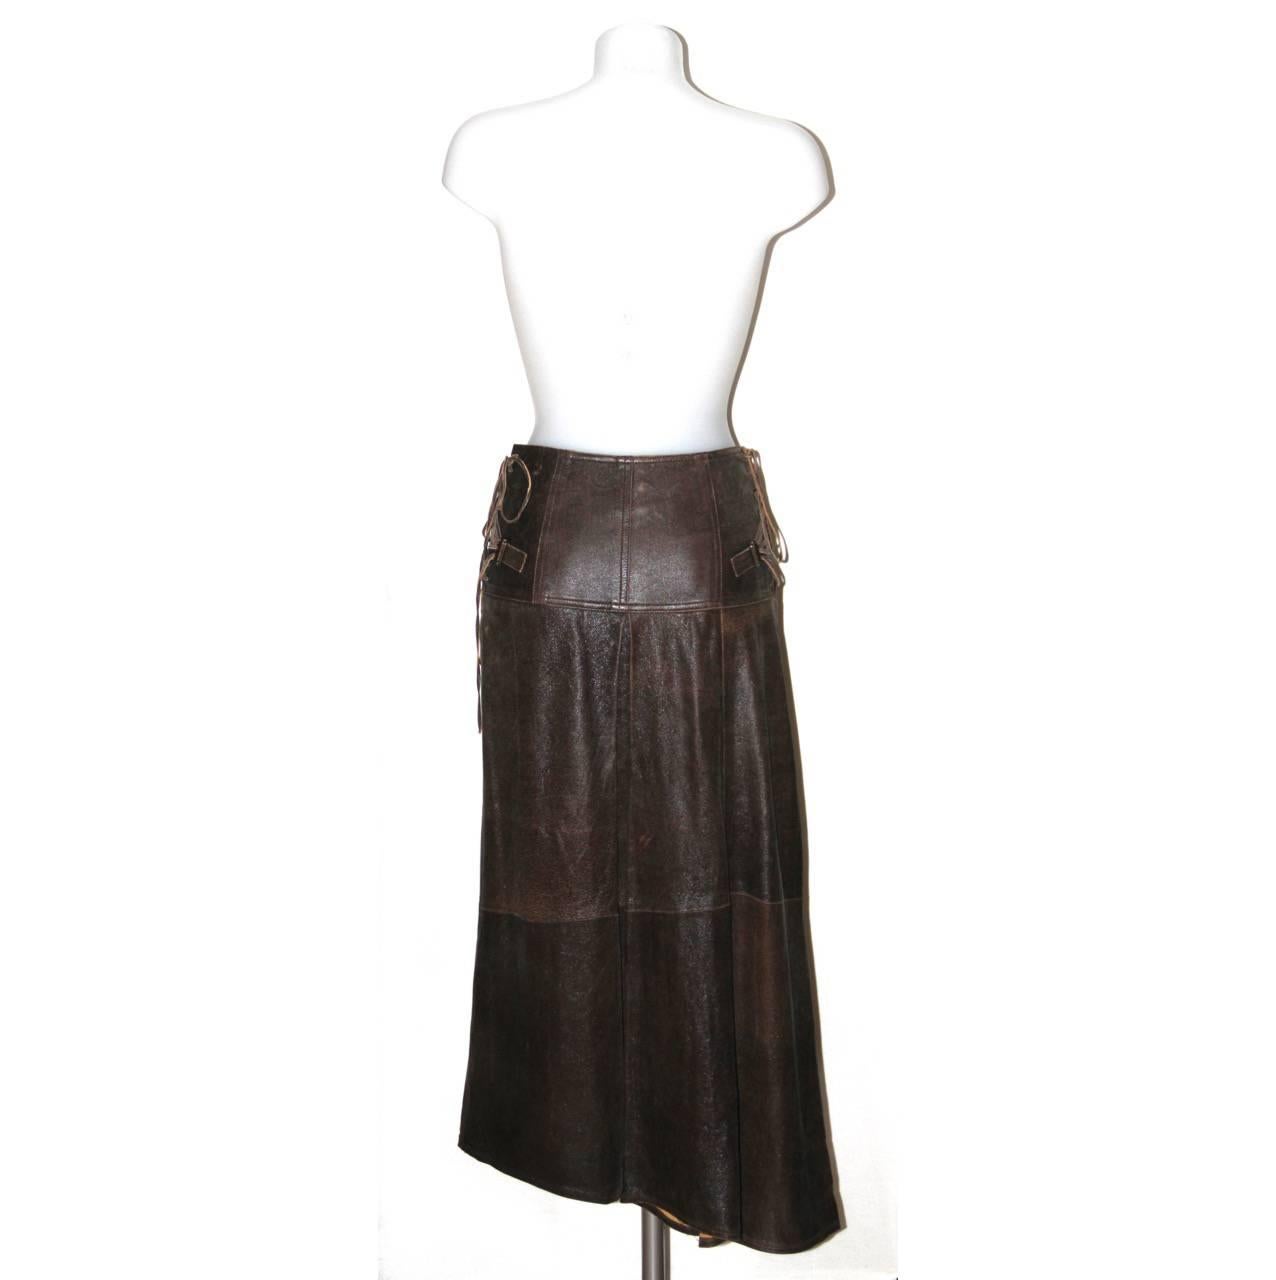 Gorgeous brown leather skirt. A signature style by John Galliano for Christian Dior featuring an A-line wrap design with side antique-gold tone metal buckles and hip laces, two front buttons closure and a box pleat on the back. 

Collection: Late